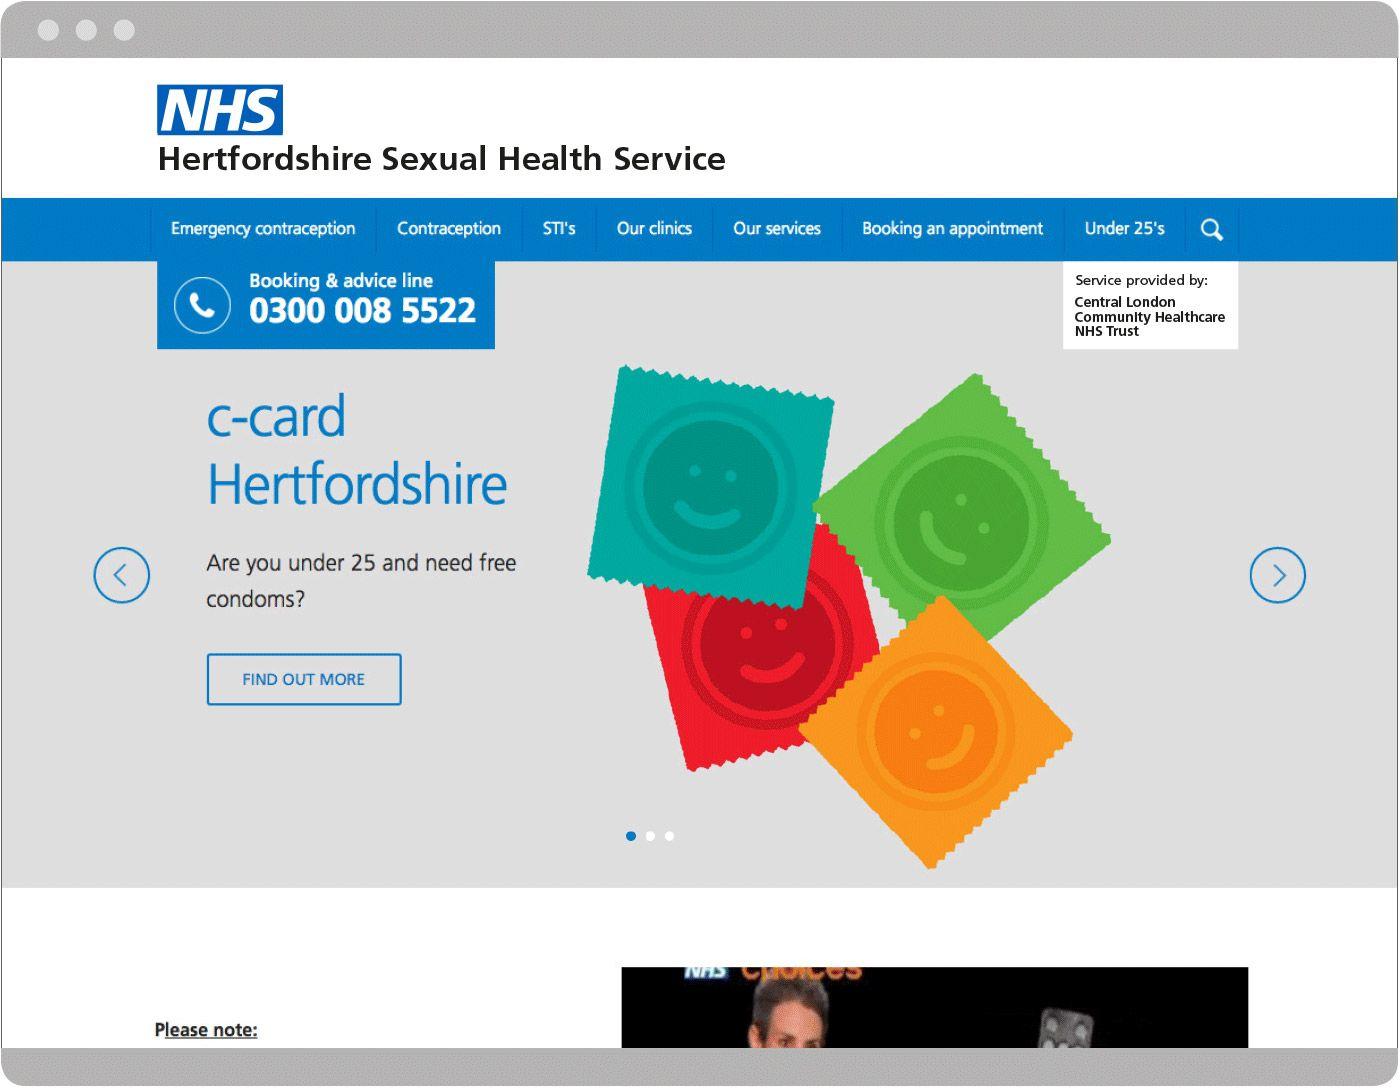 Address Logo - NHS Identity Guidelines | NHS service logo to address geographical ...